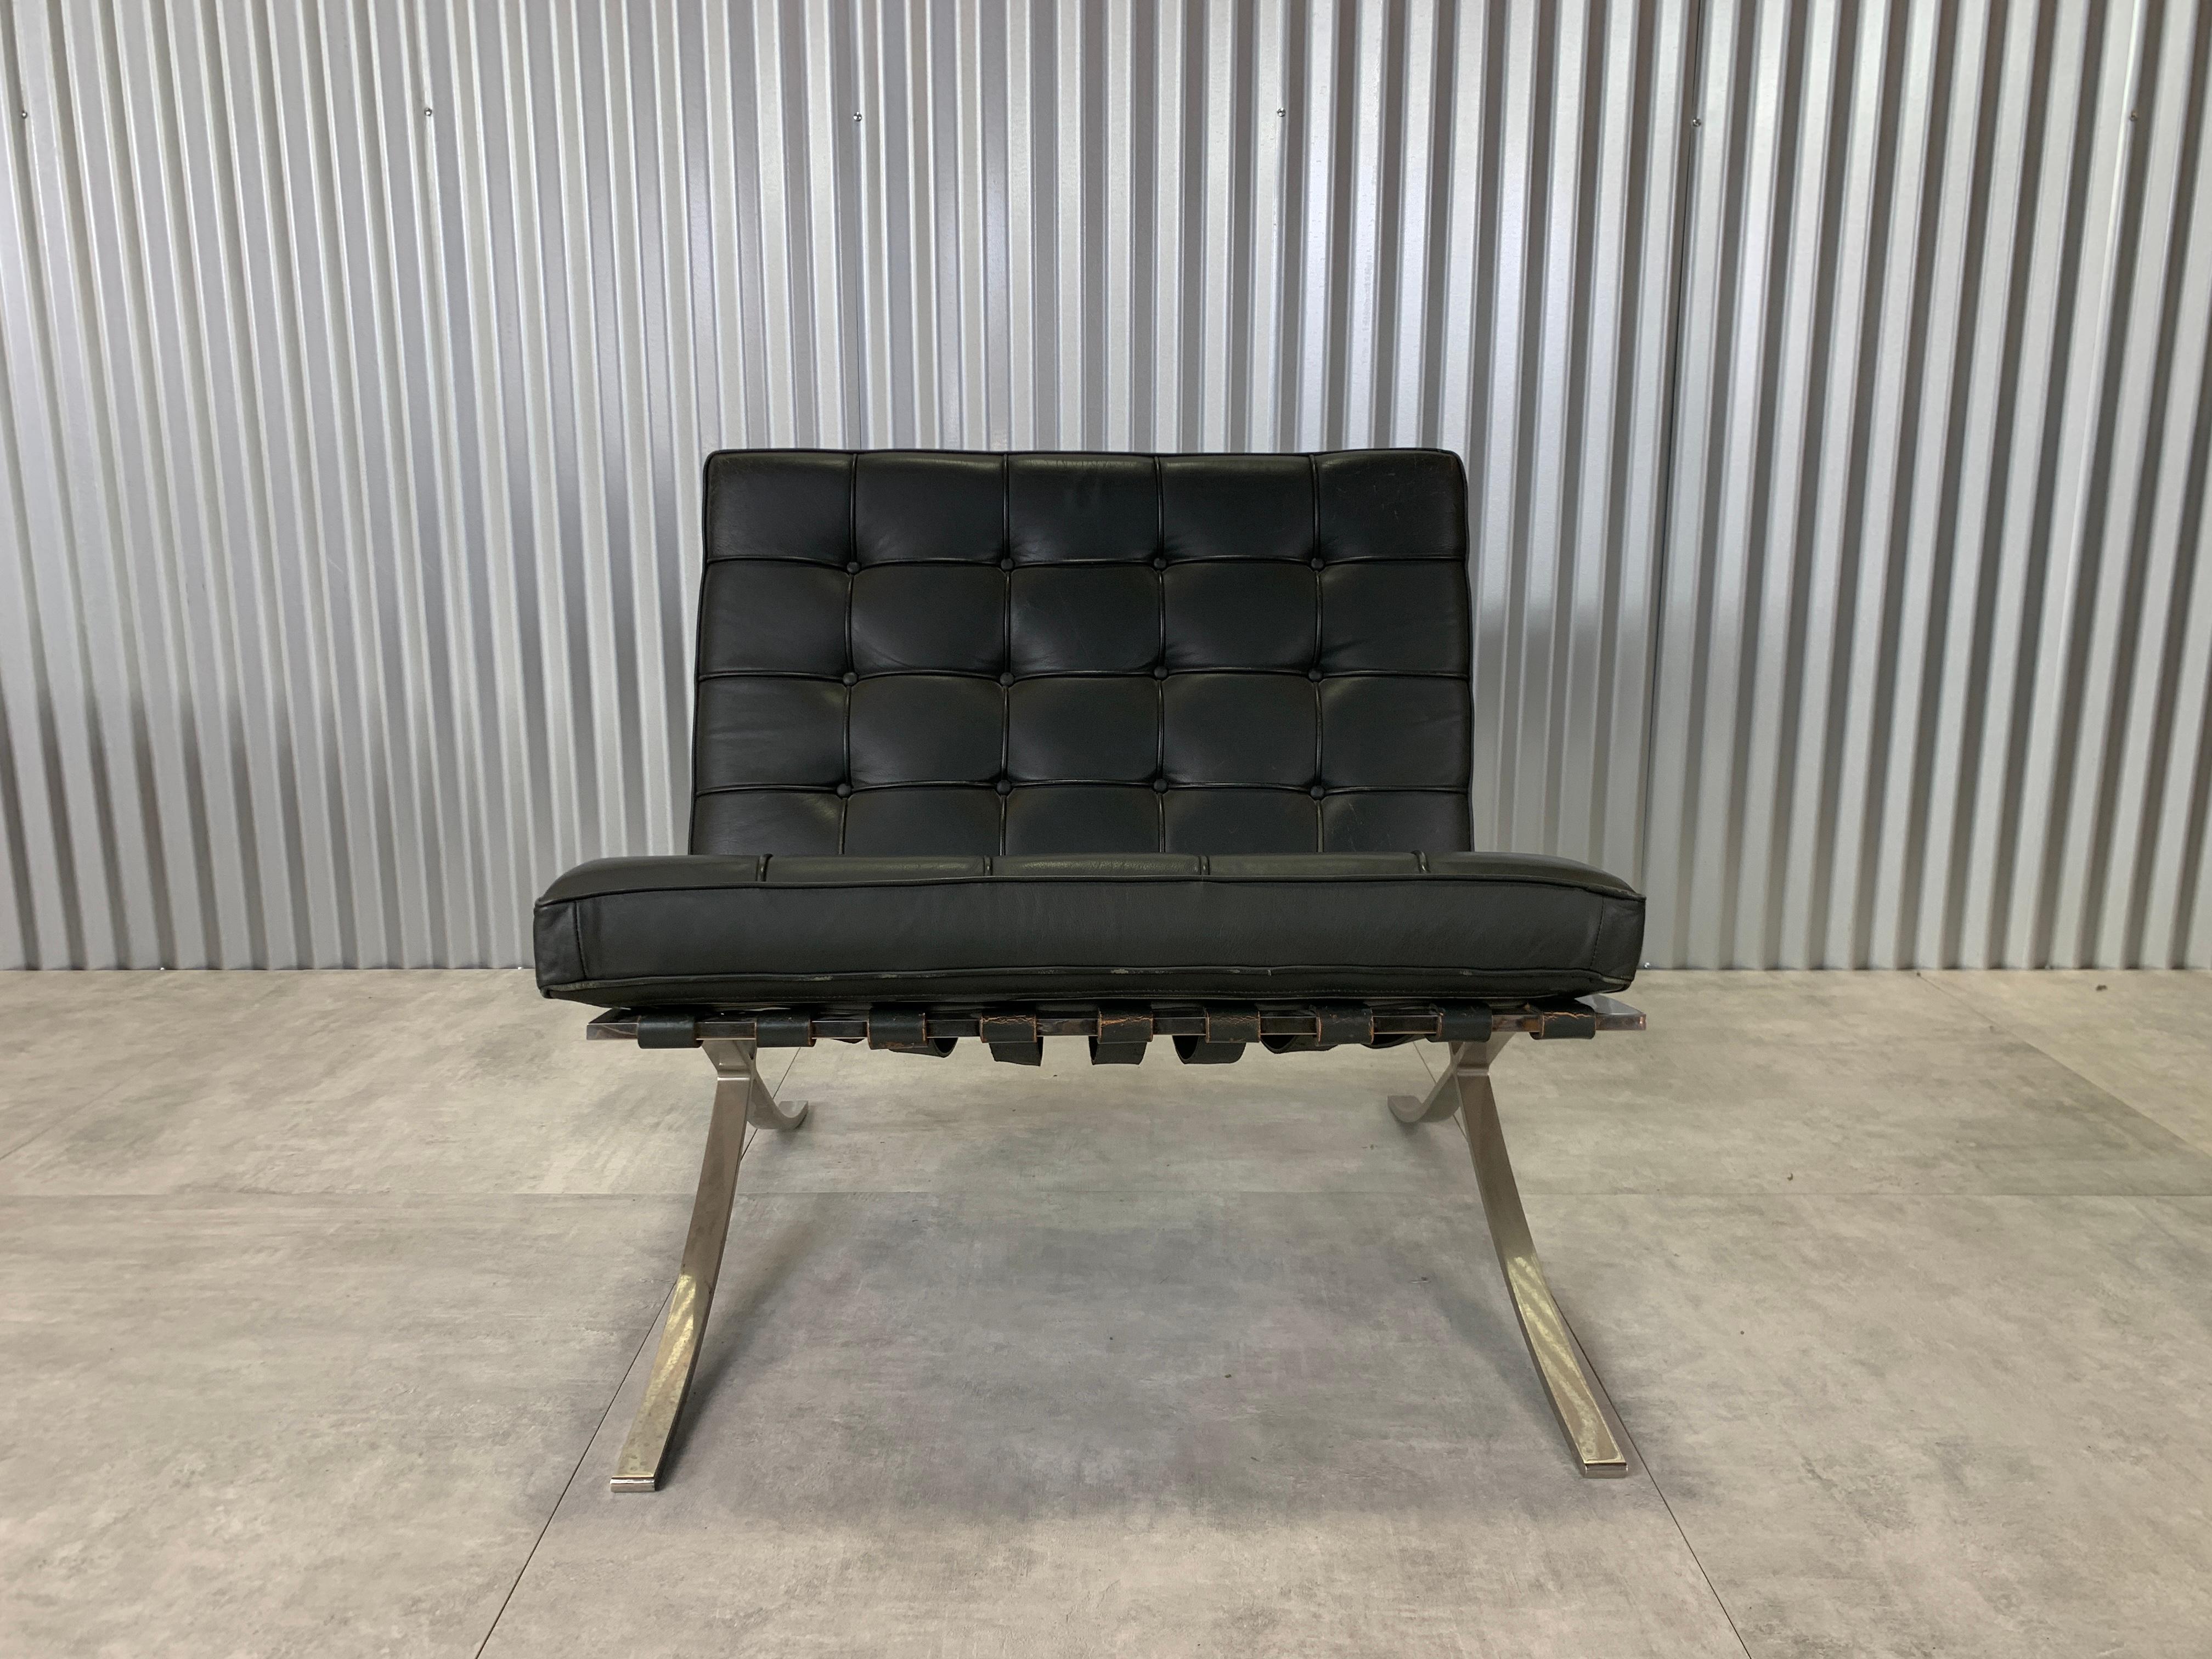 Rare set of four, early Barcelona chairs in elephant hide grey leather. Some patina and visible signs of age accentuate the domestically produced stainless steel construction. The supple grey leather and supportive and resilient foam indicate that